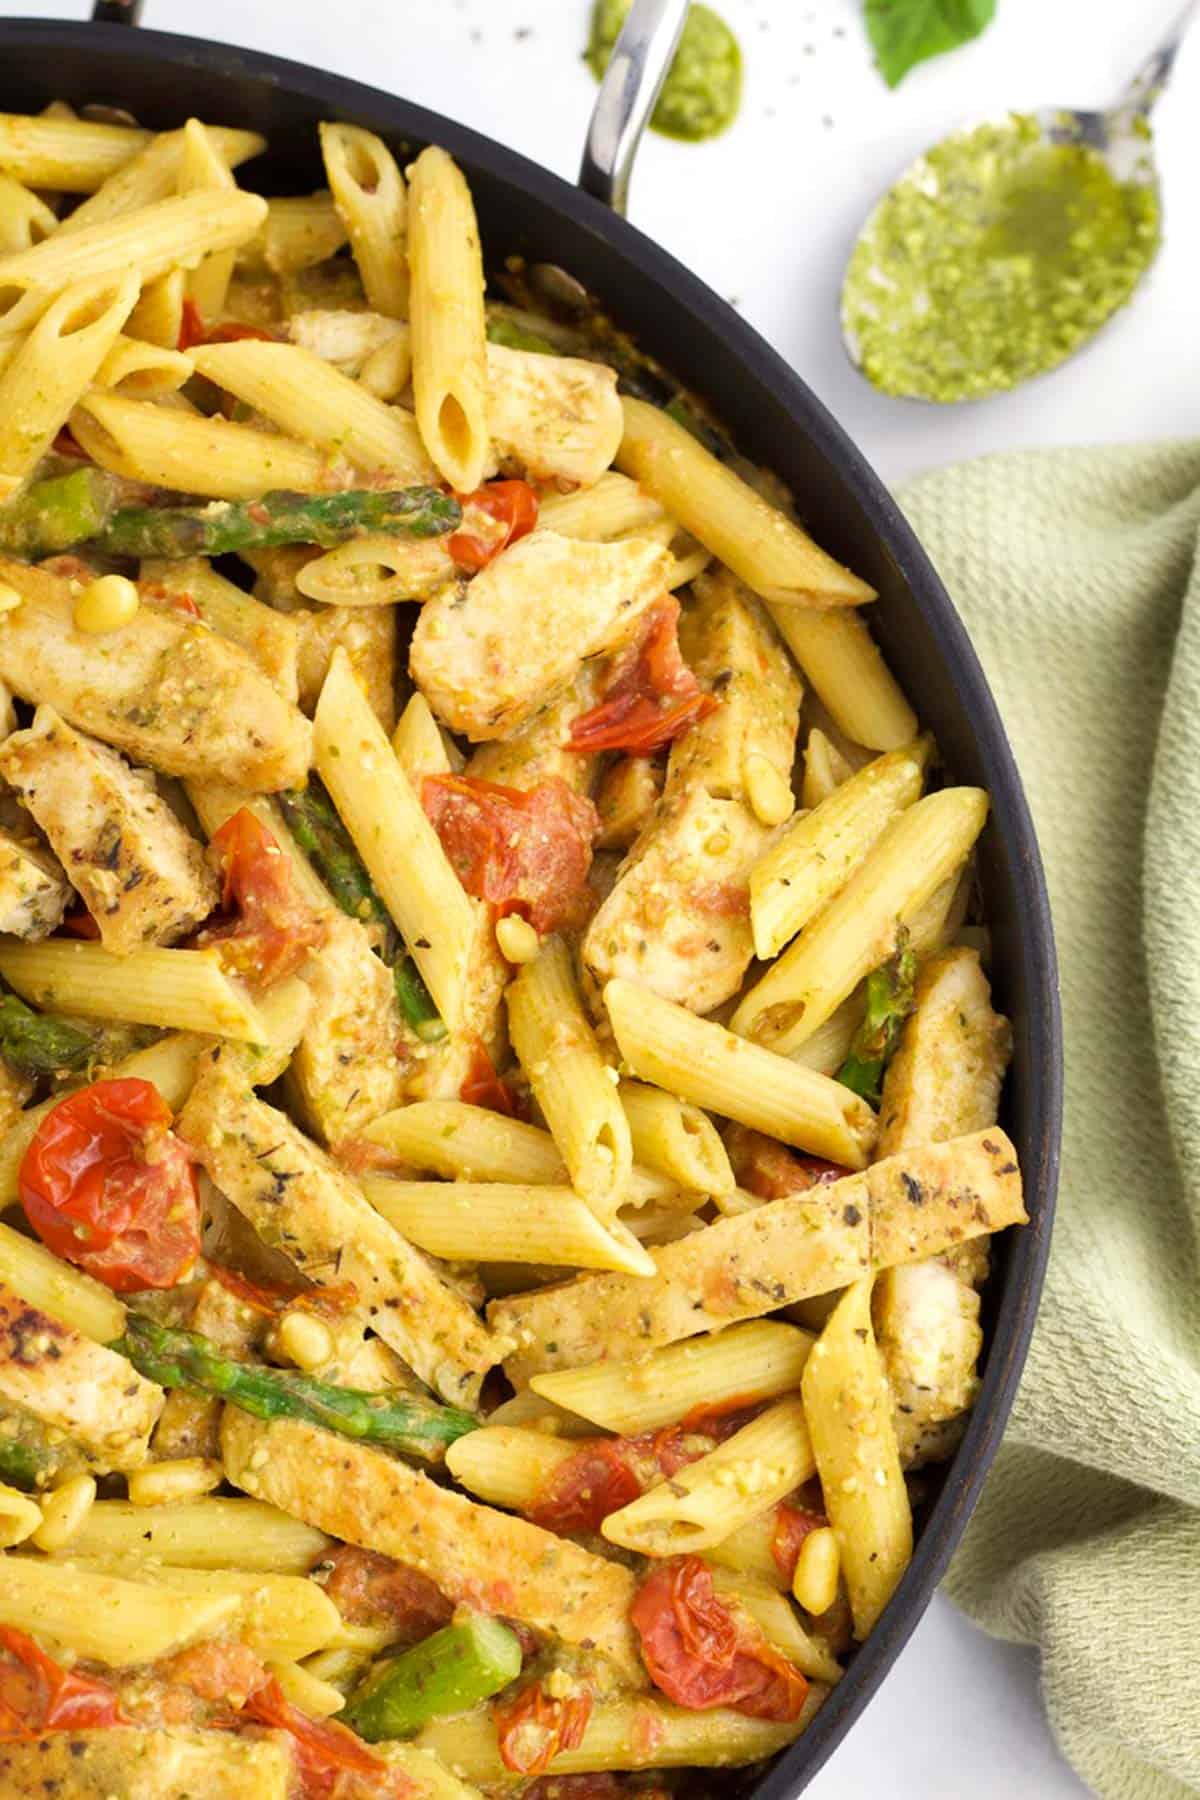 A black skillet full of chicken pesto pasta with tomatoes and veggies, with a green towel on the side of the pan.